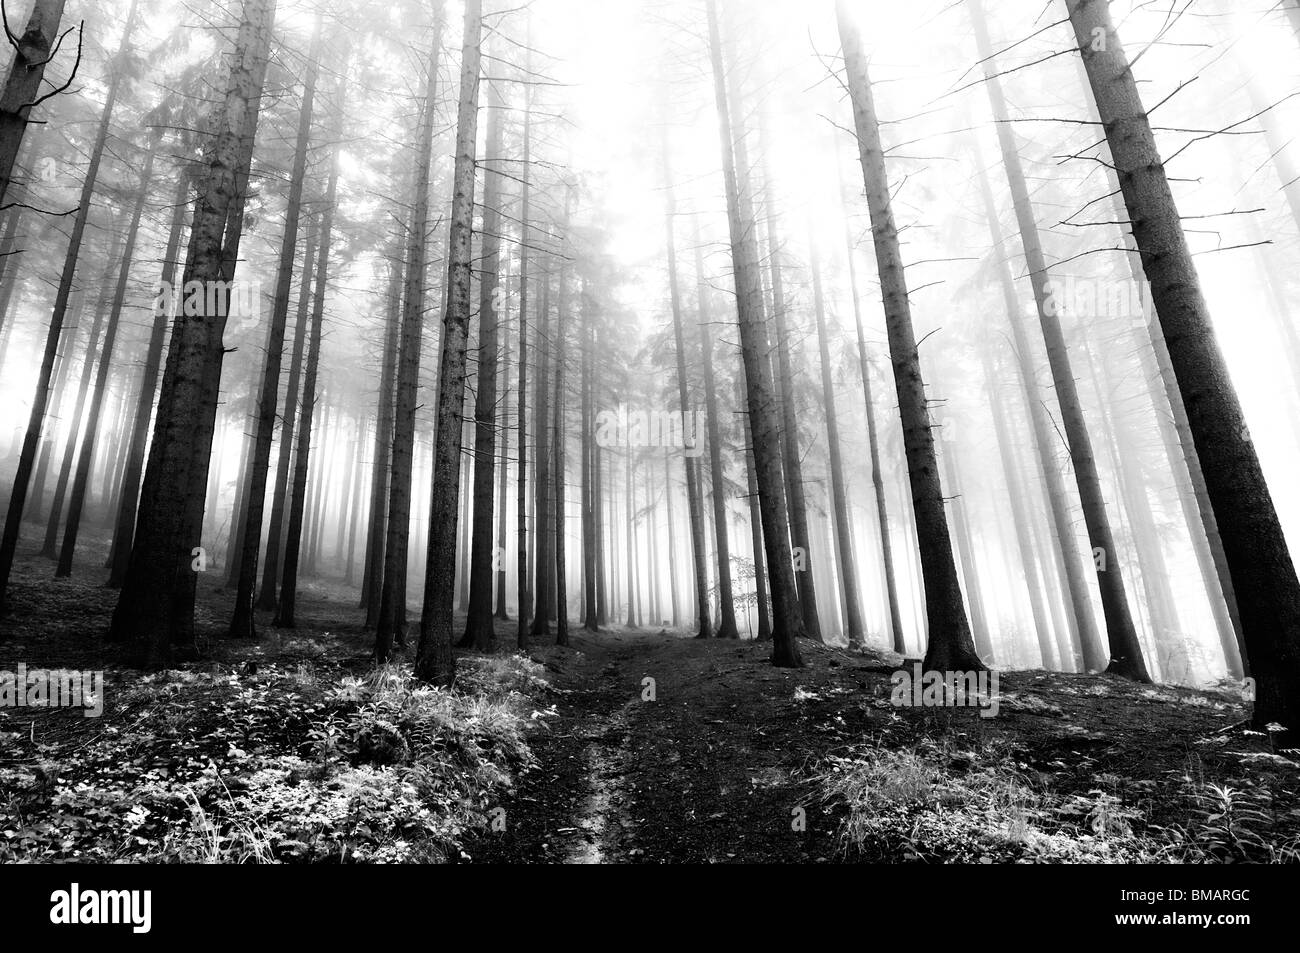 Image of the coniferous forest early in the morning - early morning fog Stock Photo